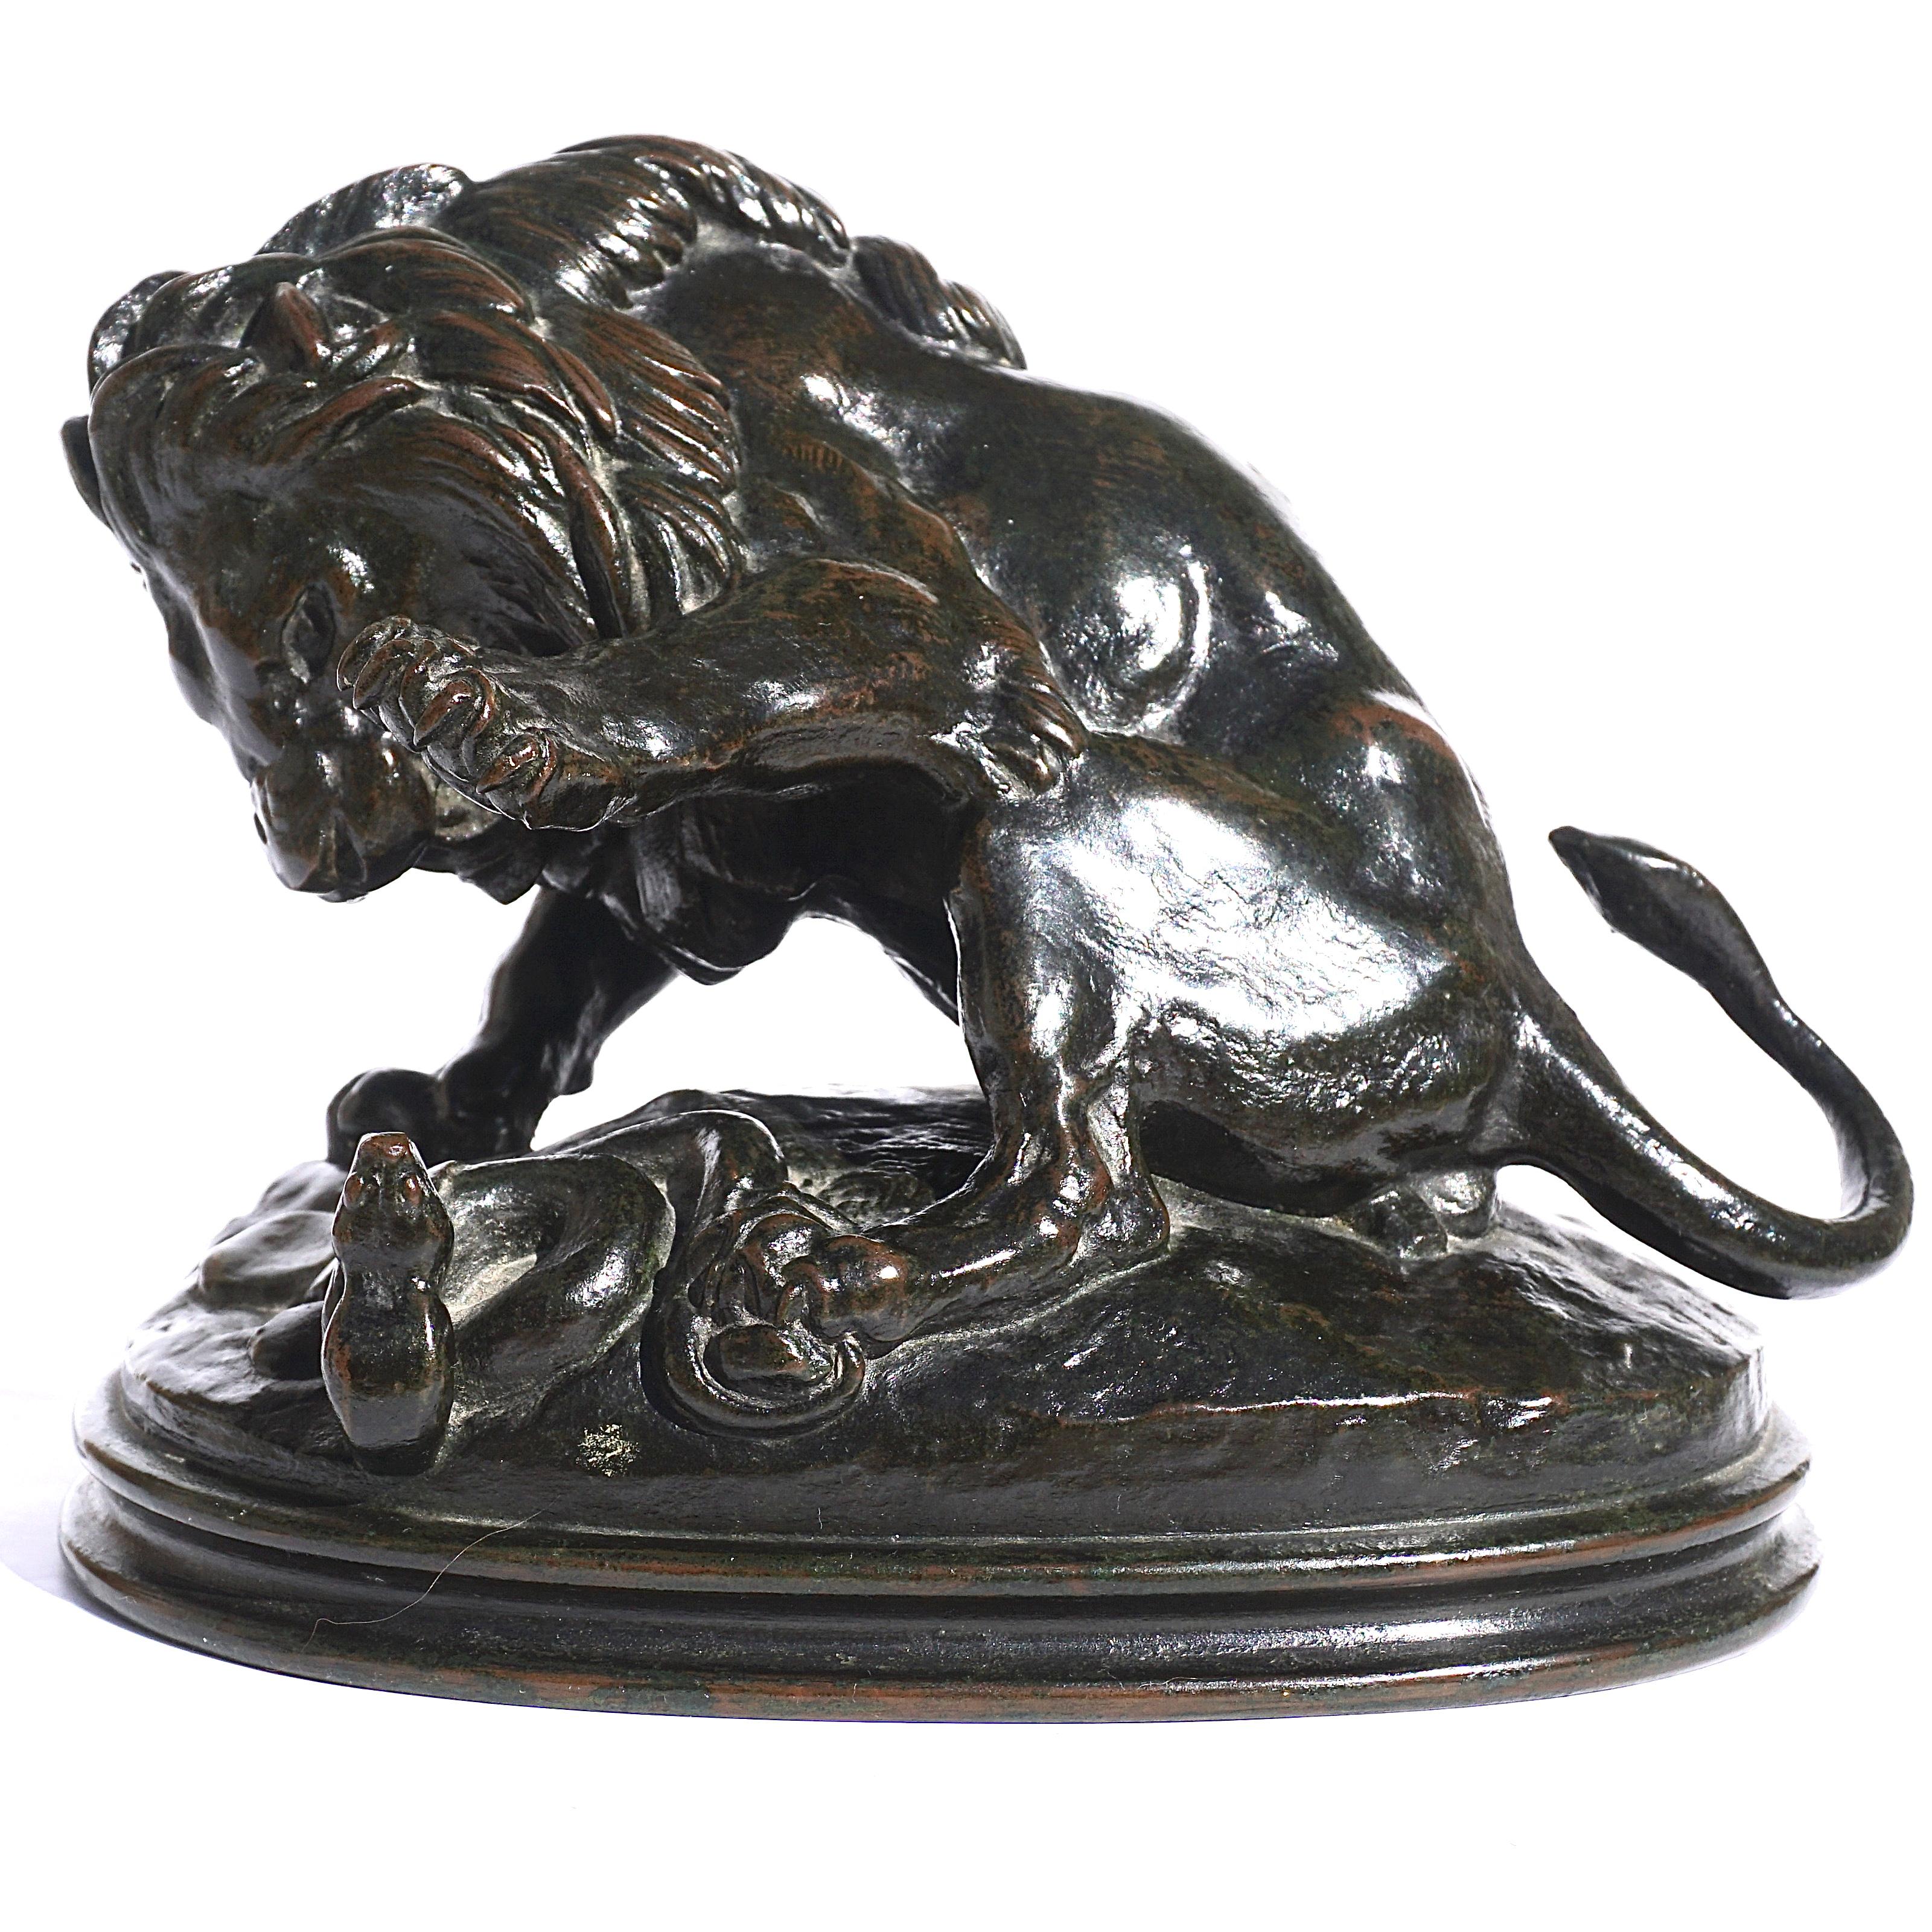 Antoine-Louis Barye (FRENCH, 1795-1875) 
Lion au serpent No3, esquisse (Lion crushing a snake No3, sketch model)
Signed: BARYE
Bronze, dark-brown/red patina with touches of verdigris 
Measures: Height 5.15 inches (13 cm.), width 6.65 inches,